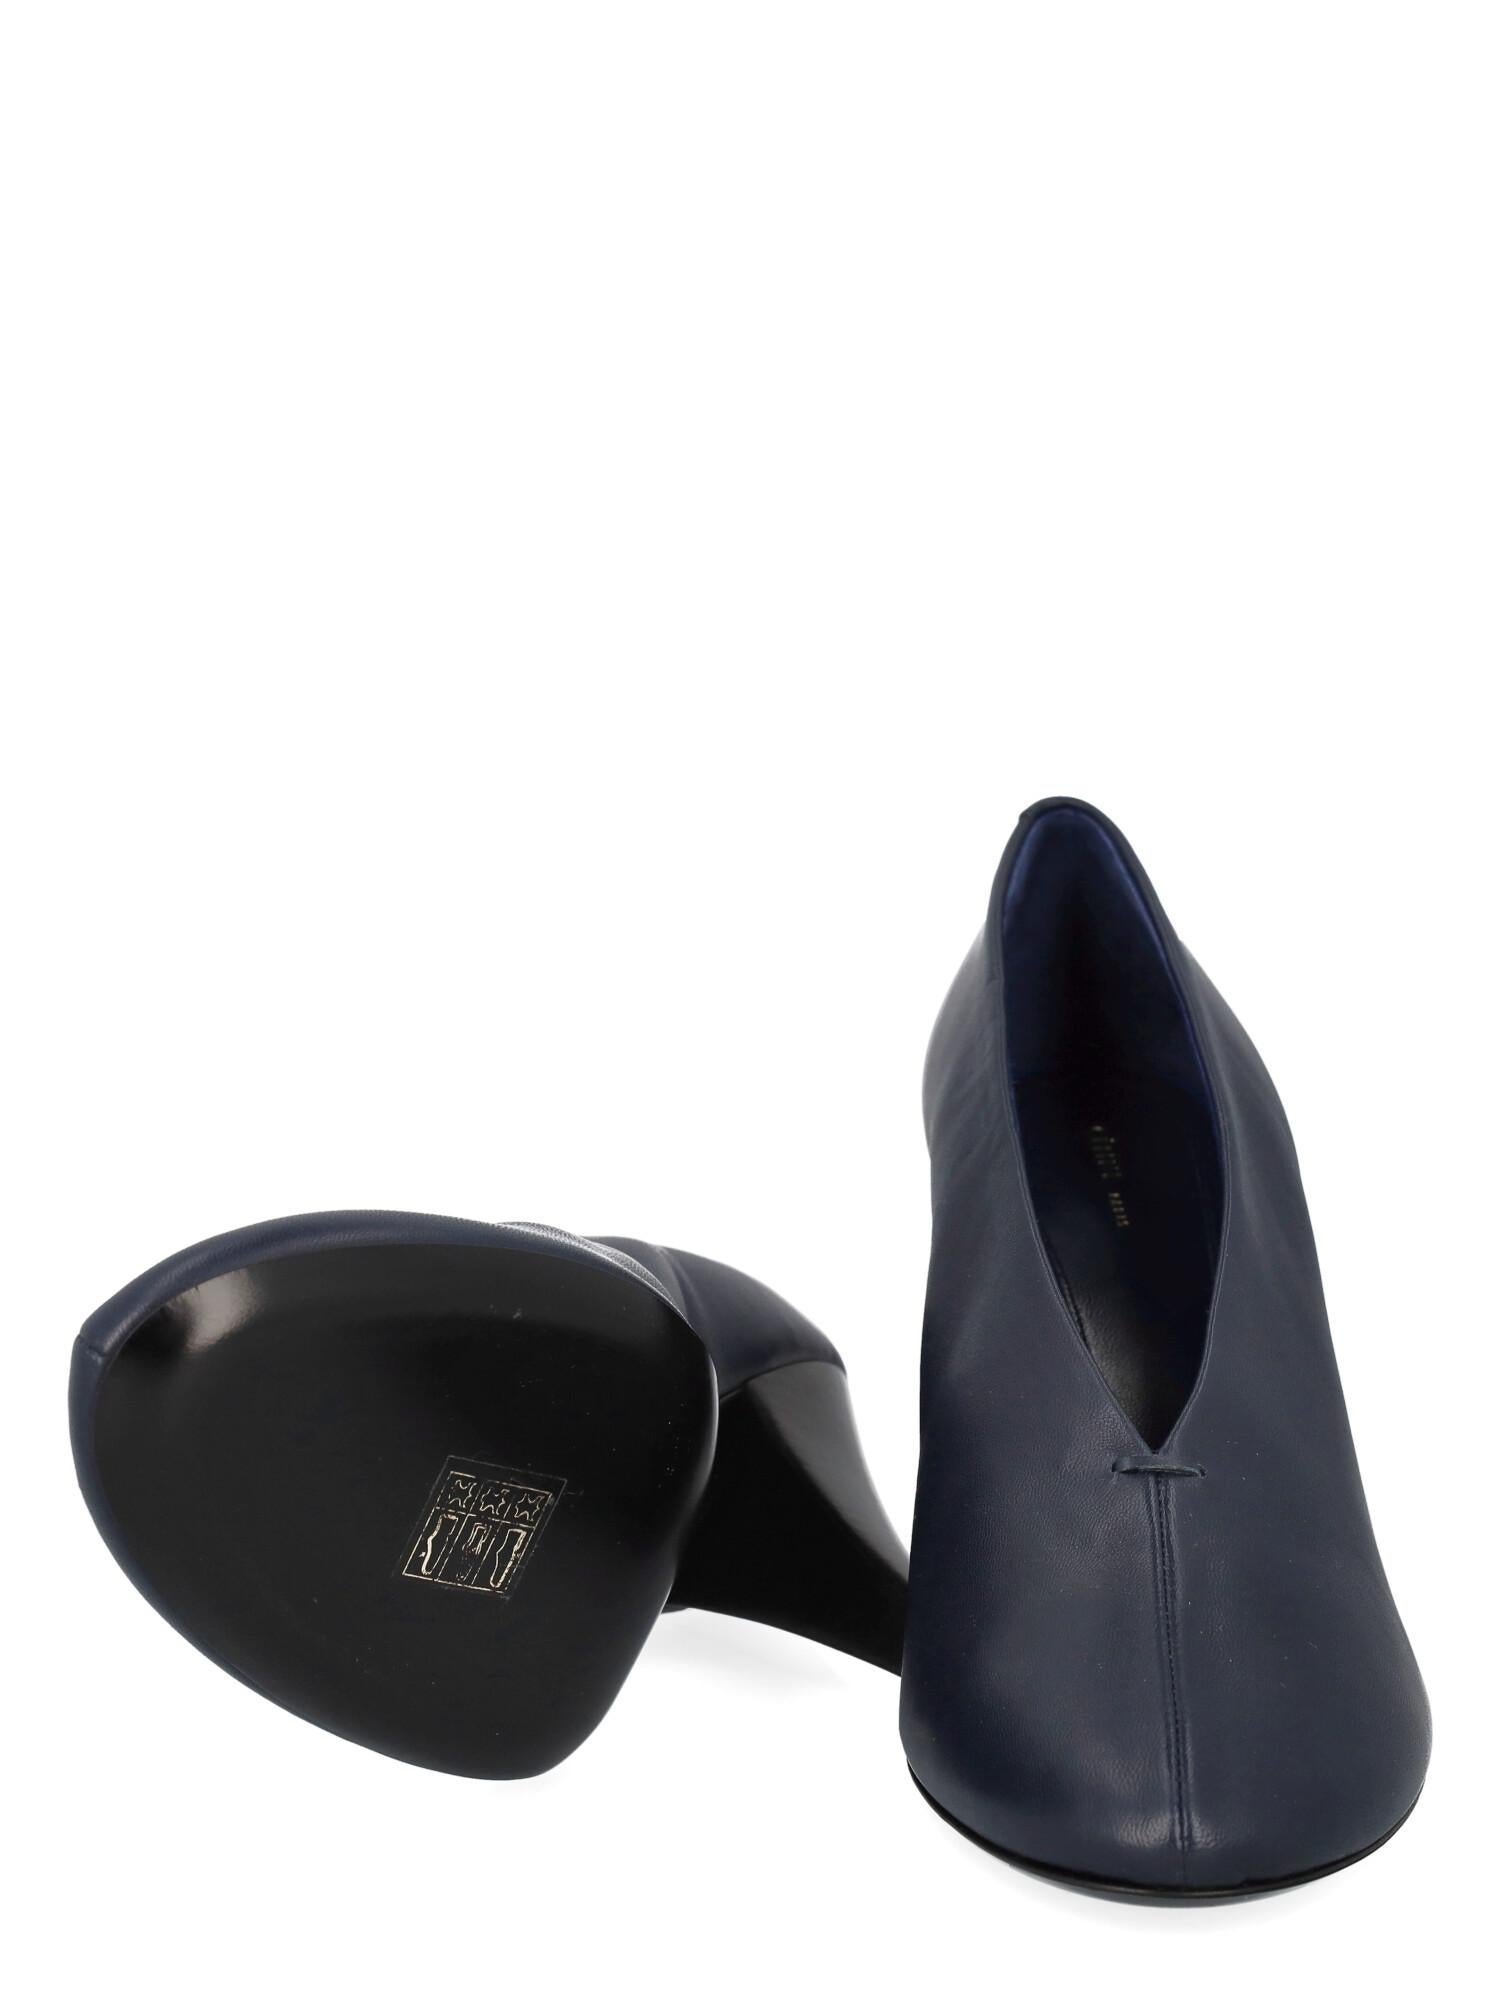 Celine Women Pumps Navy Leather EU 39.5 In Excellent Condition For Sale In Milan, IT